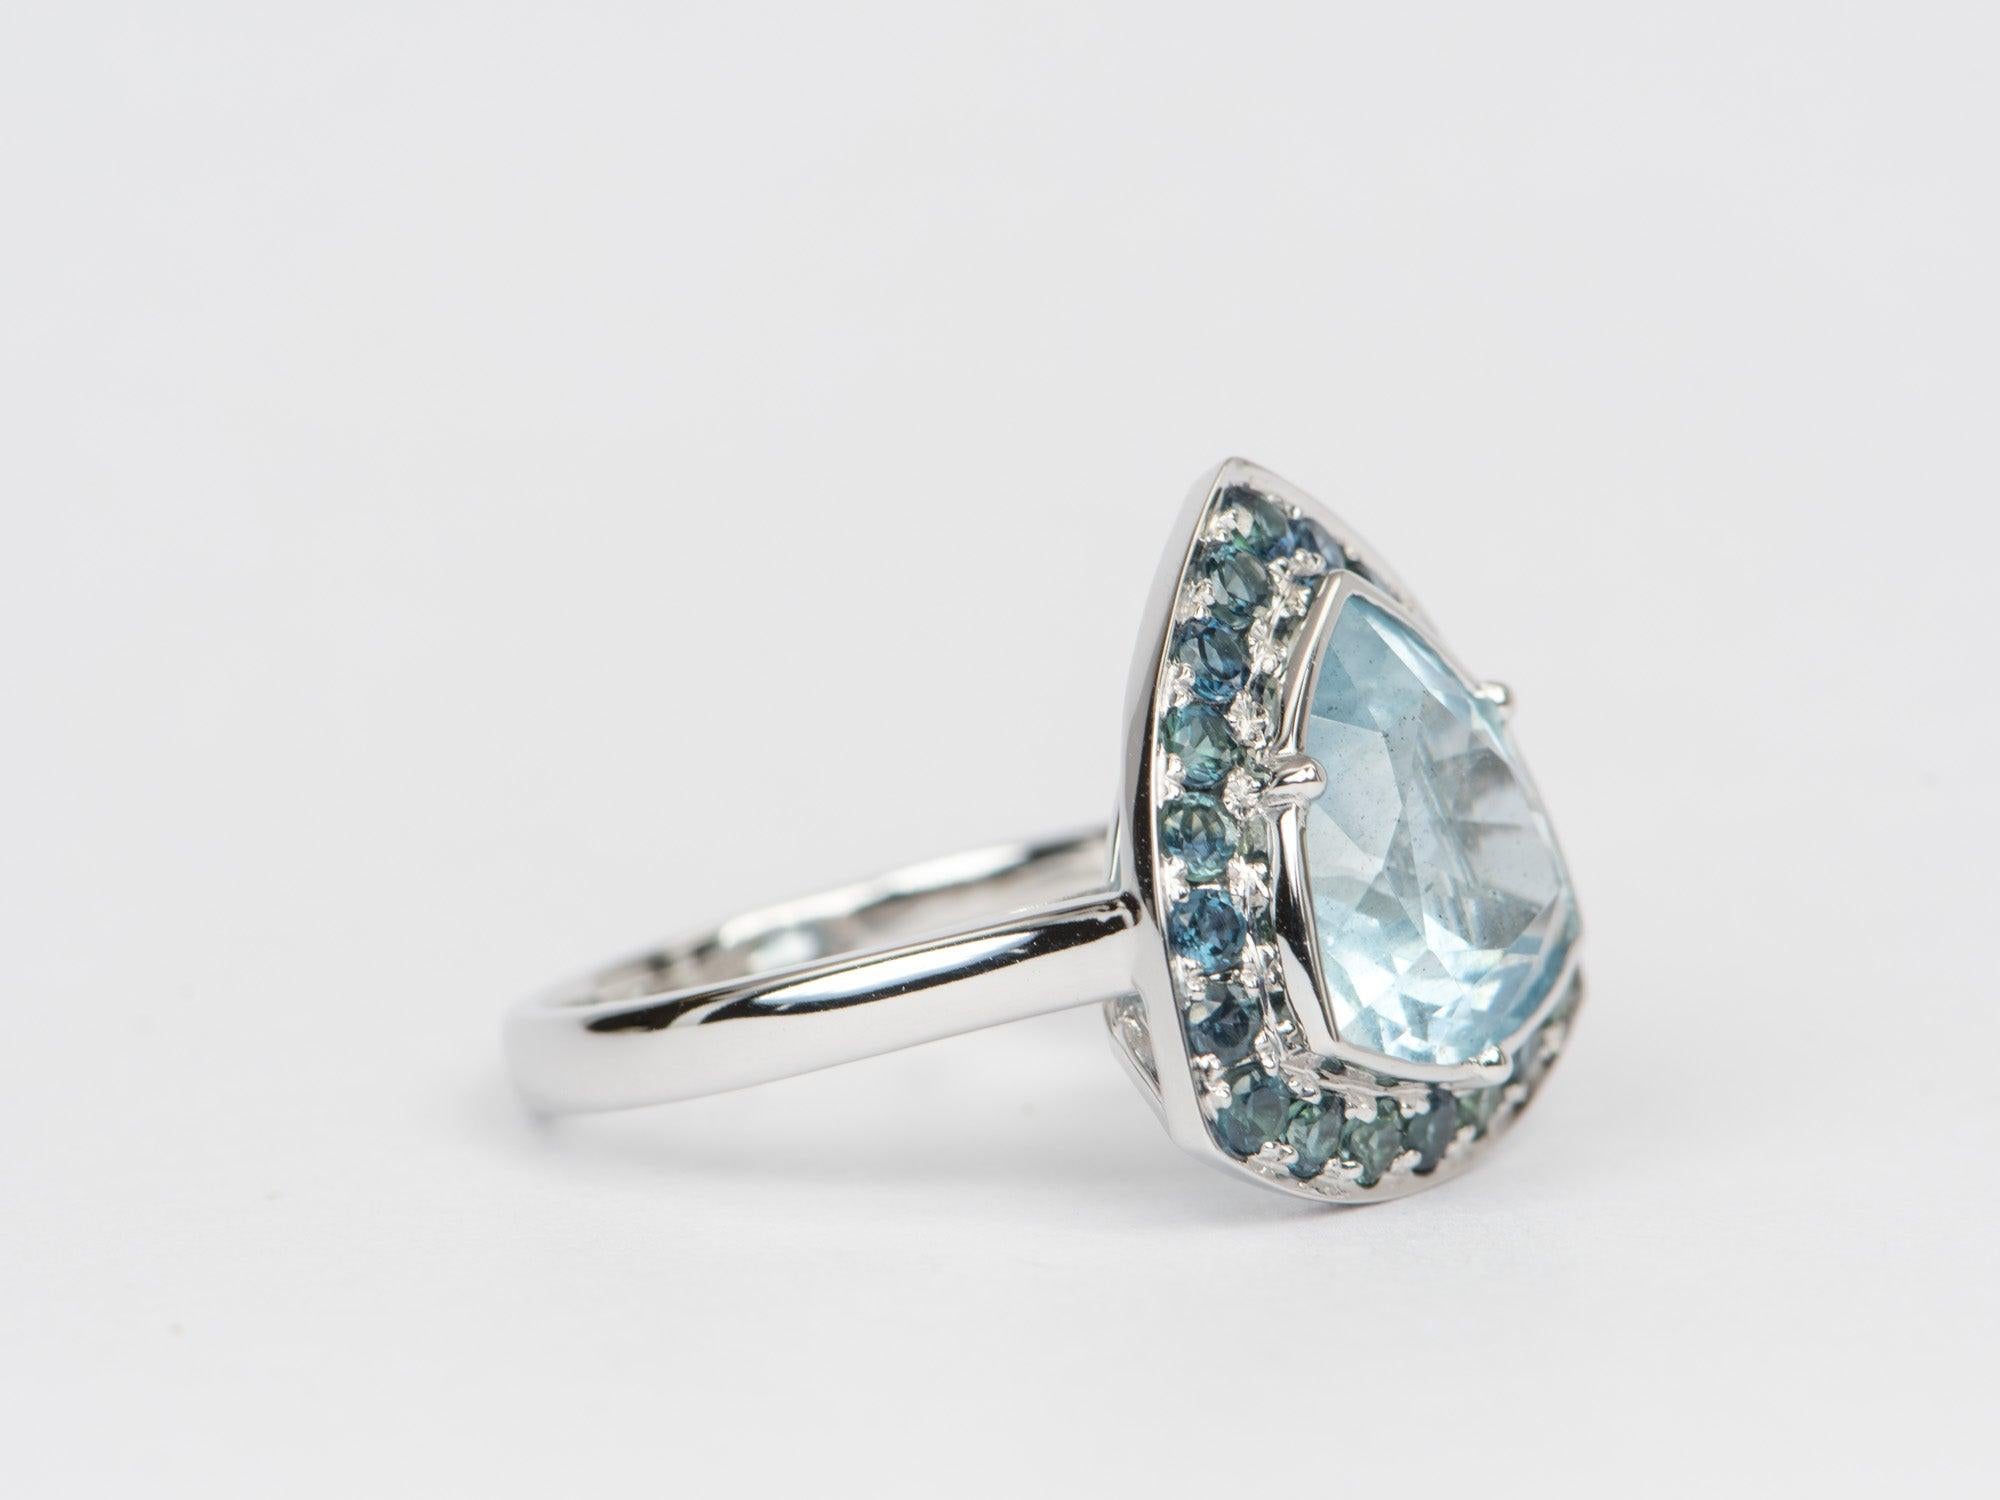 ♥ Solid 9k white gold ring set with a beautiful trillion-shaped moss aquamarine with a Montana sapphire halo
♥ Gorgeous blue color!
♥ The item measures 18.4mm in length, 17.7mm in width, and stands 8mm from the finger

♥ US Size 8 (Free resizing up